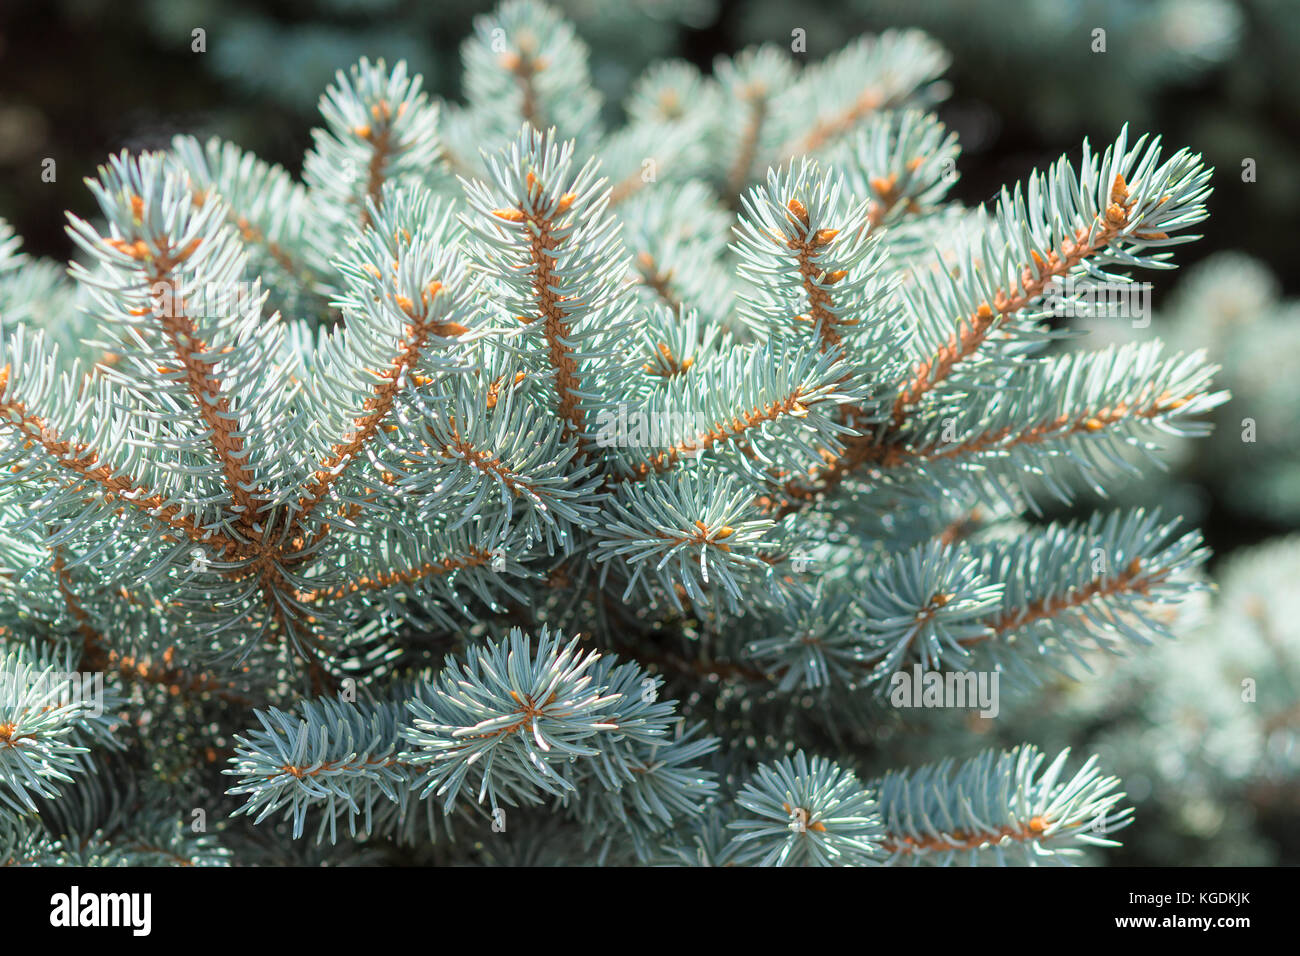 Branch of Colorado blue spruce or Picea pungens with needle-like leaves. Close-up stock photo. Stock Photo